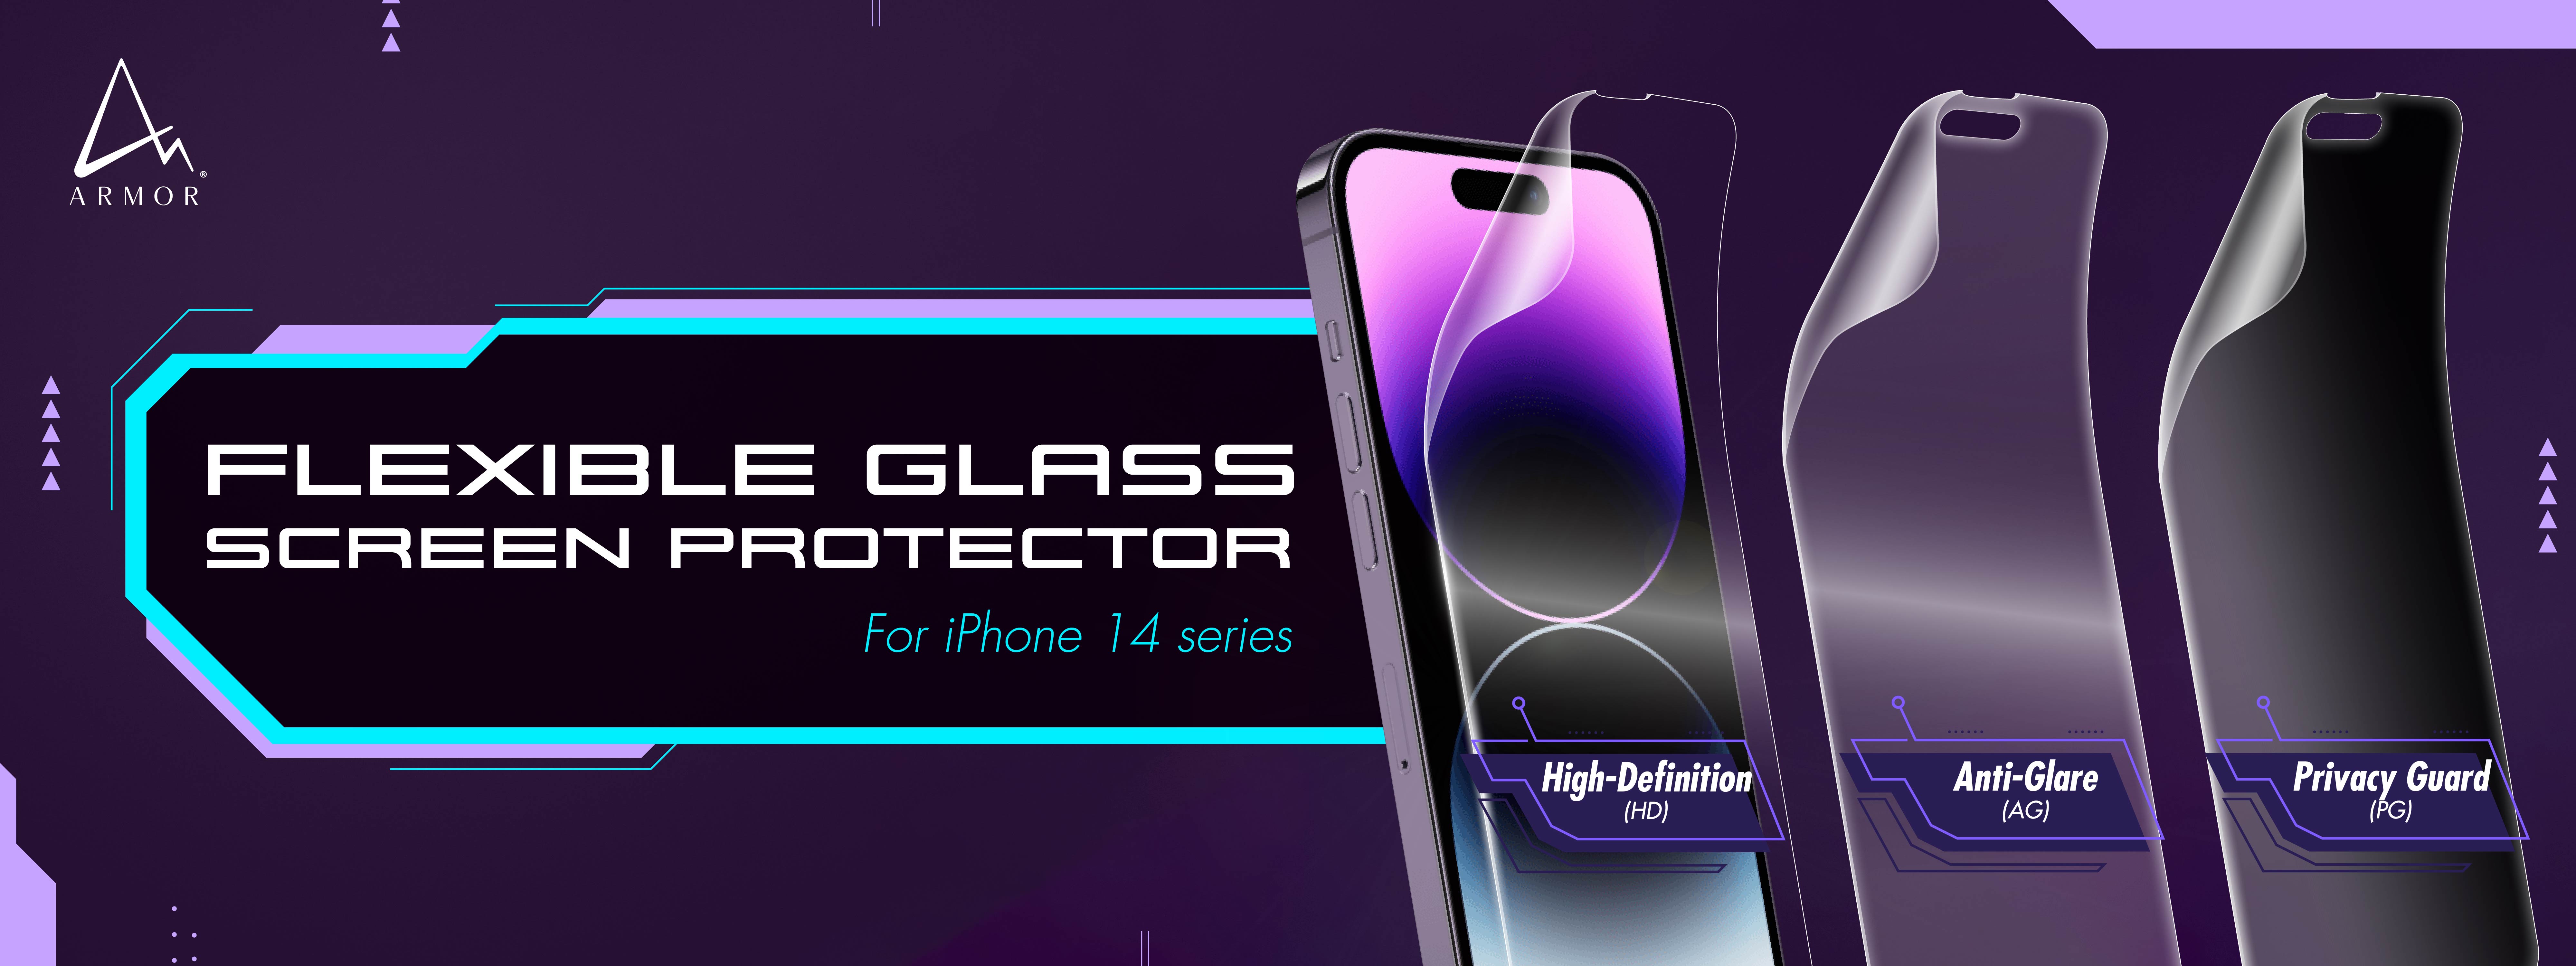 iPhone 14 - Flexible Glass Screen Protector HG / AG / PG